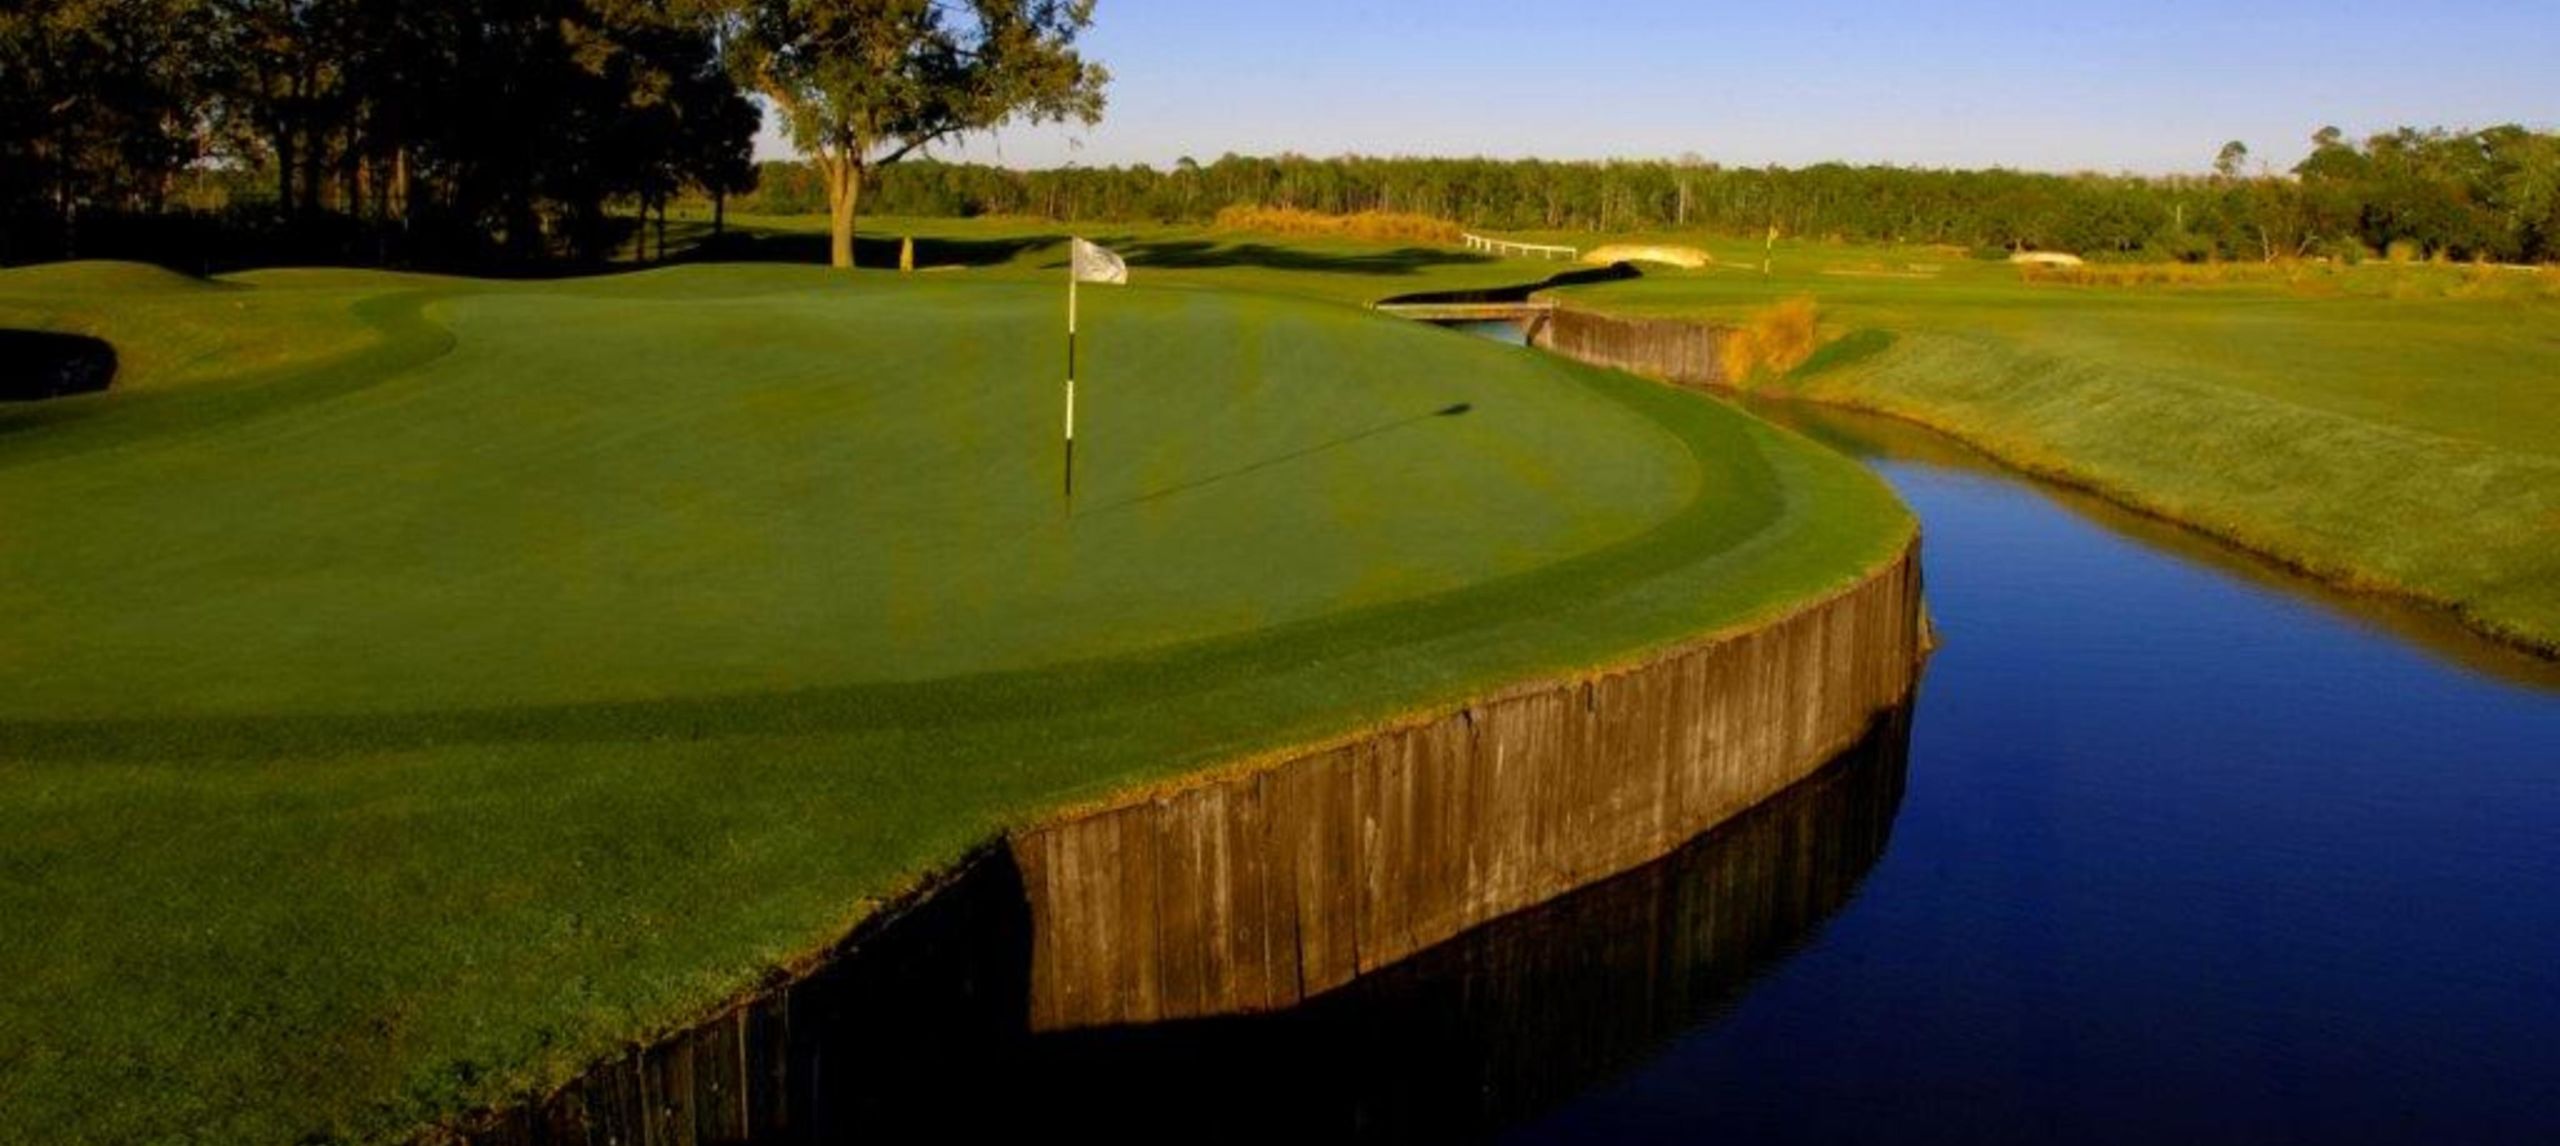 Grand Cypress Golf course and water hazard